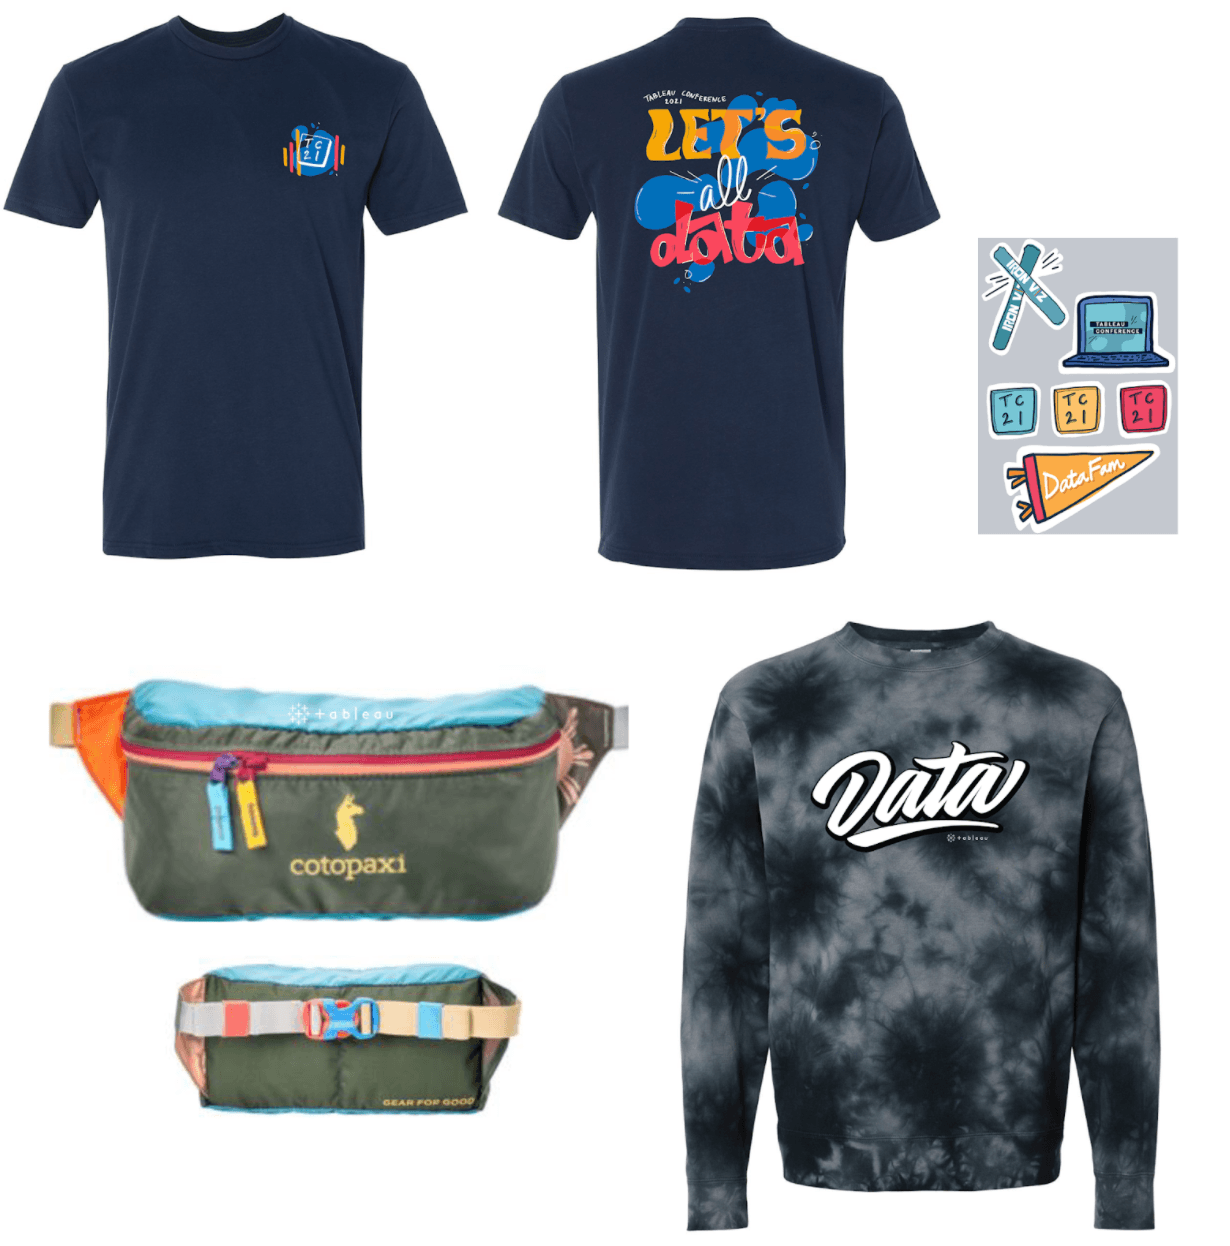 Tableau Conference 21 T-shirt, stickers, Cotopaxi hip pack and data sweatshirt